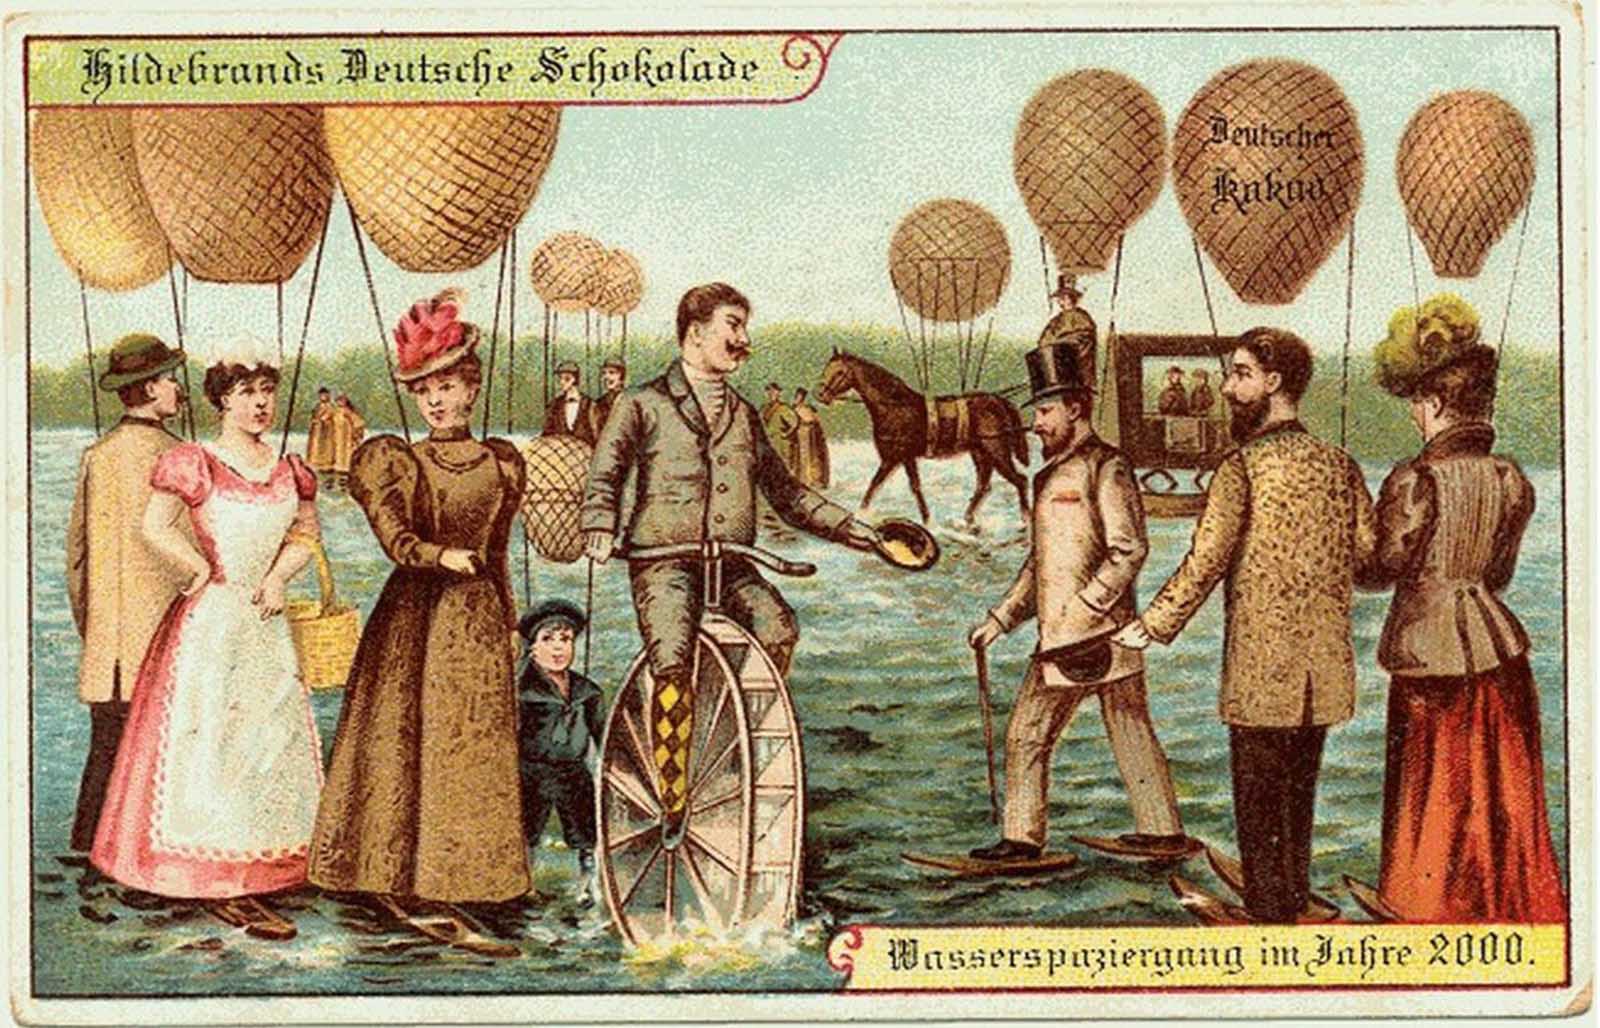 Strolling on a lake with the aid of balloons.